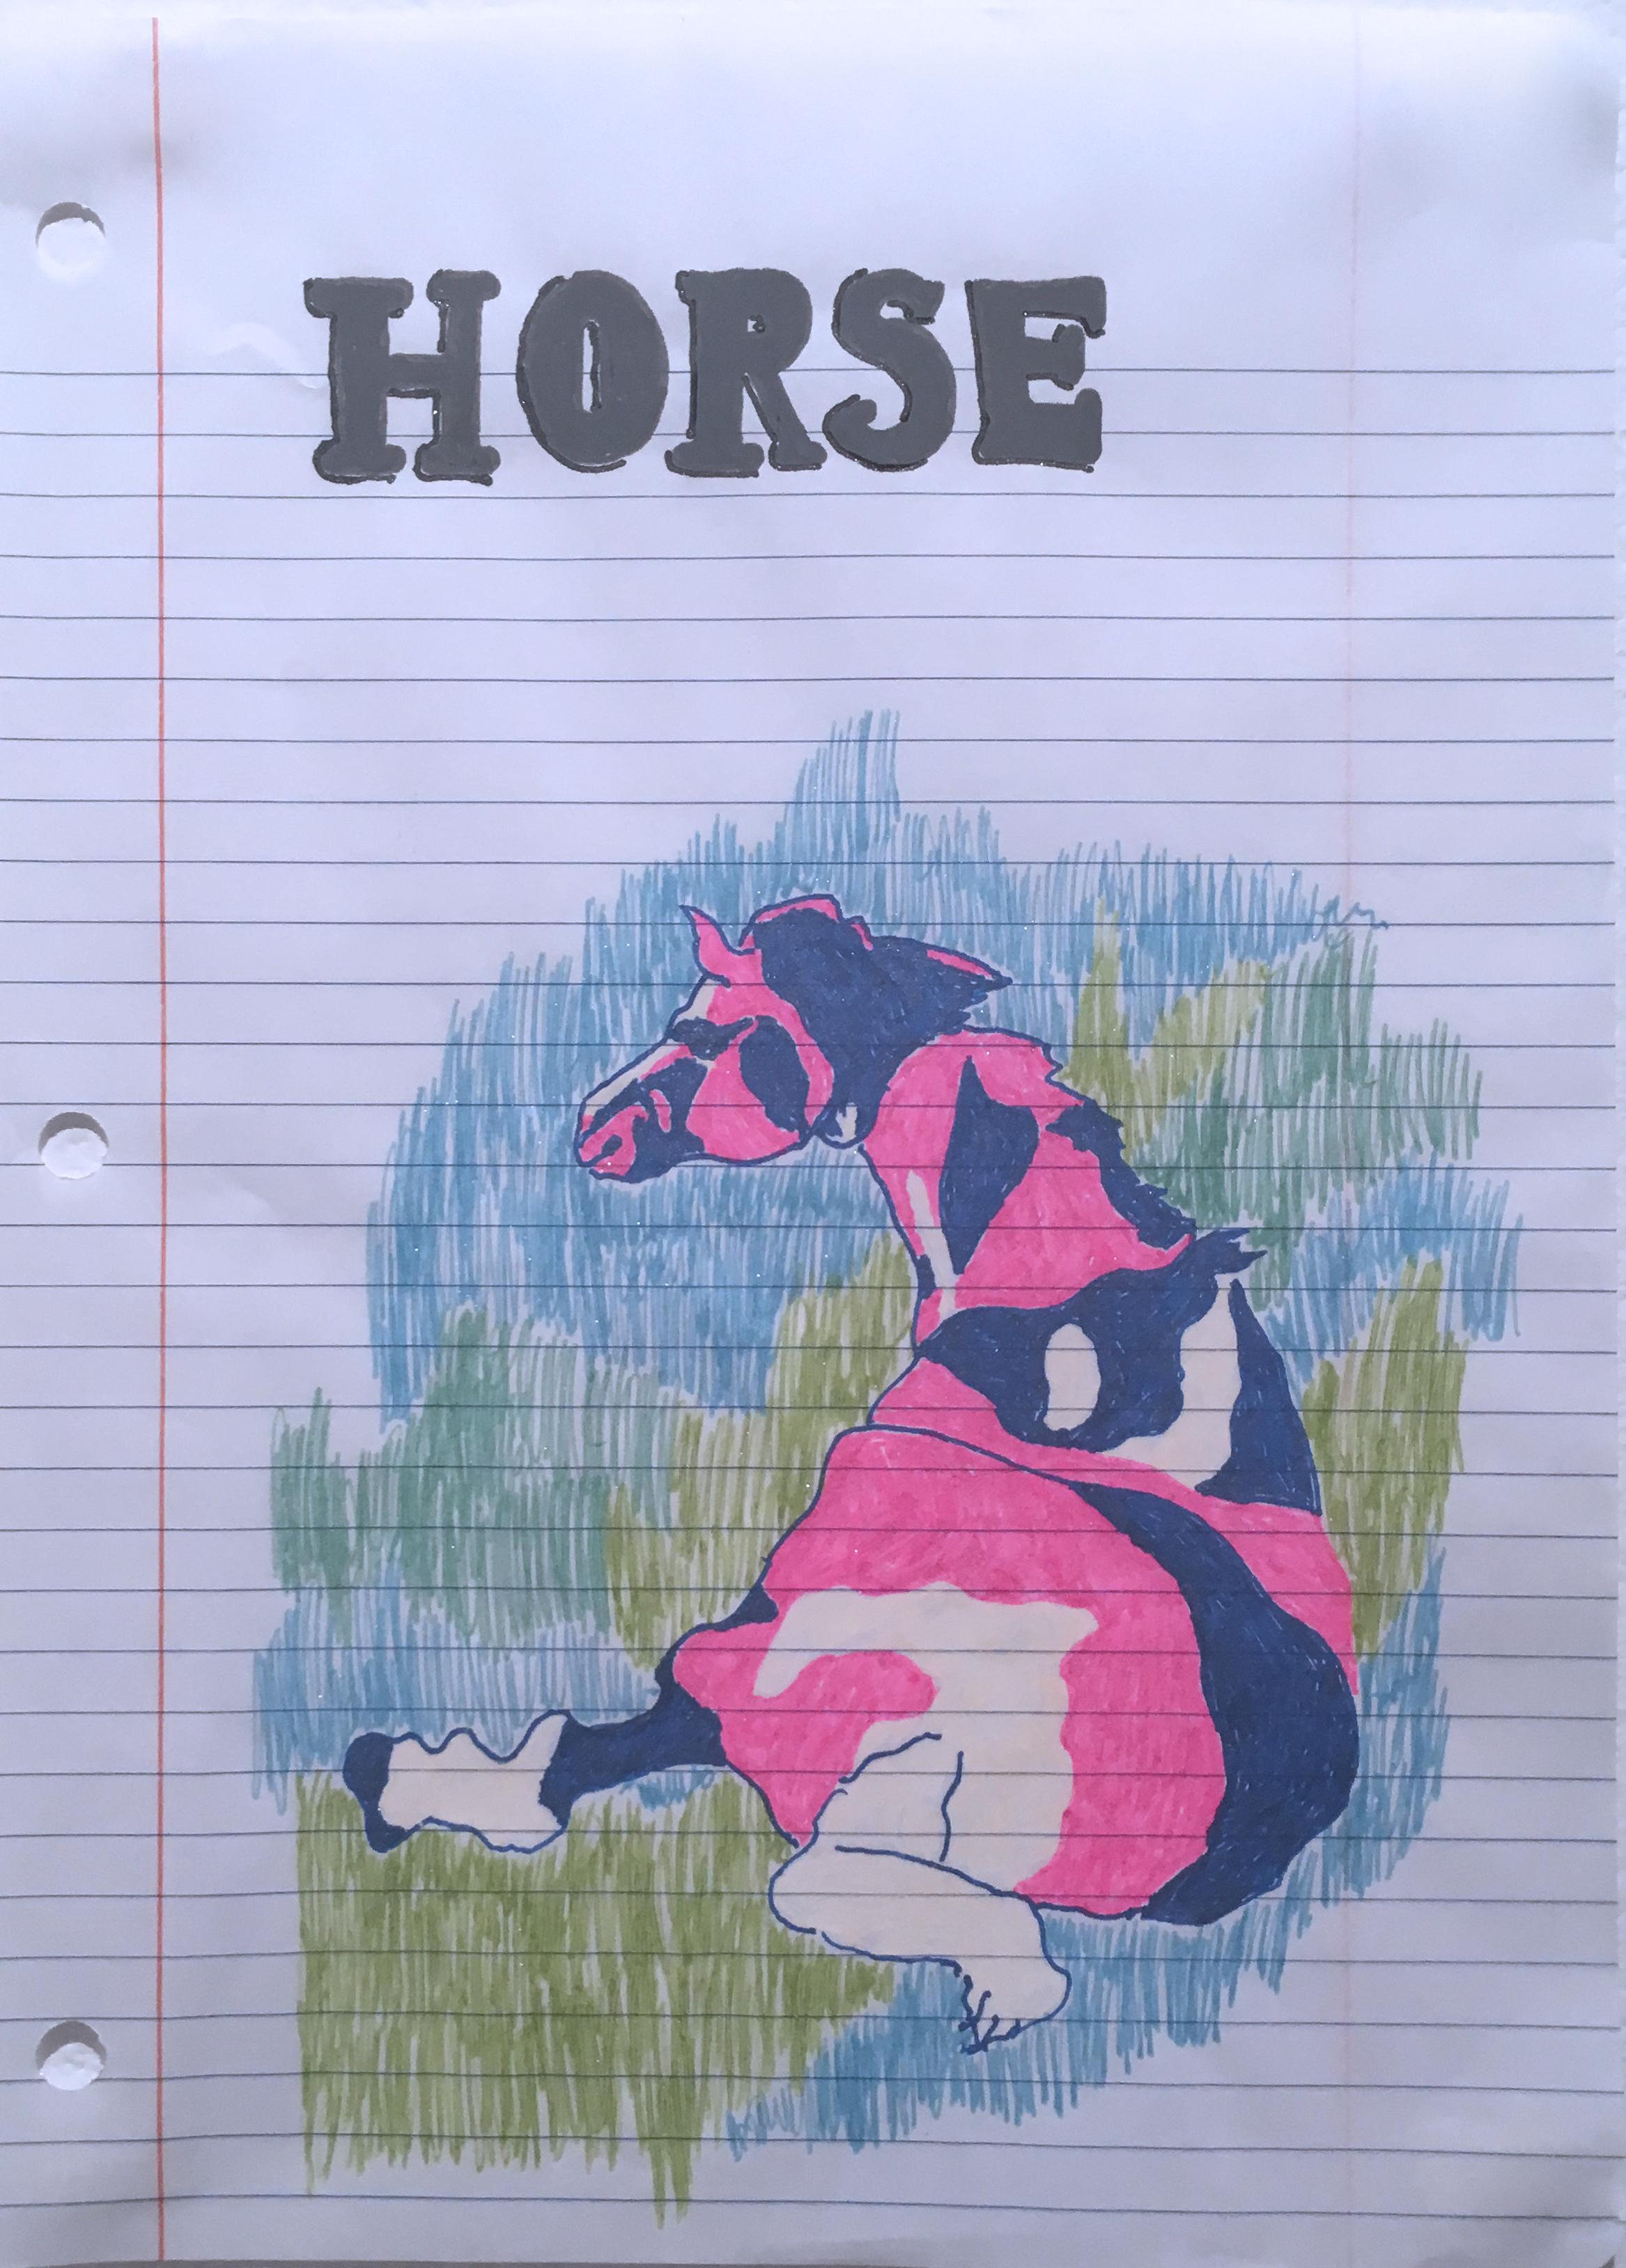 Horse, 2020, gel pen on paper, figurative, drawing, framed, pink, blue, white - Art by Macauley Norman